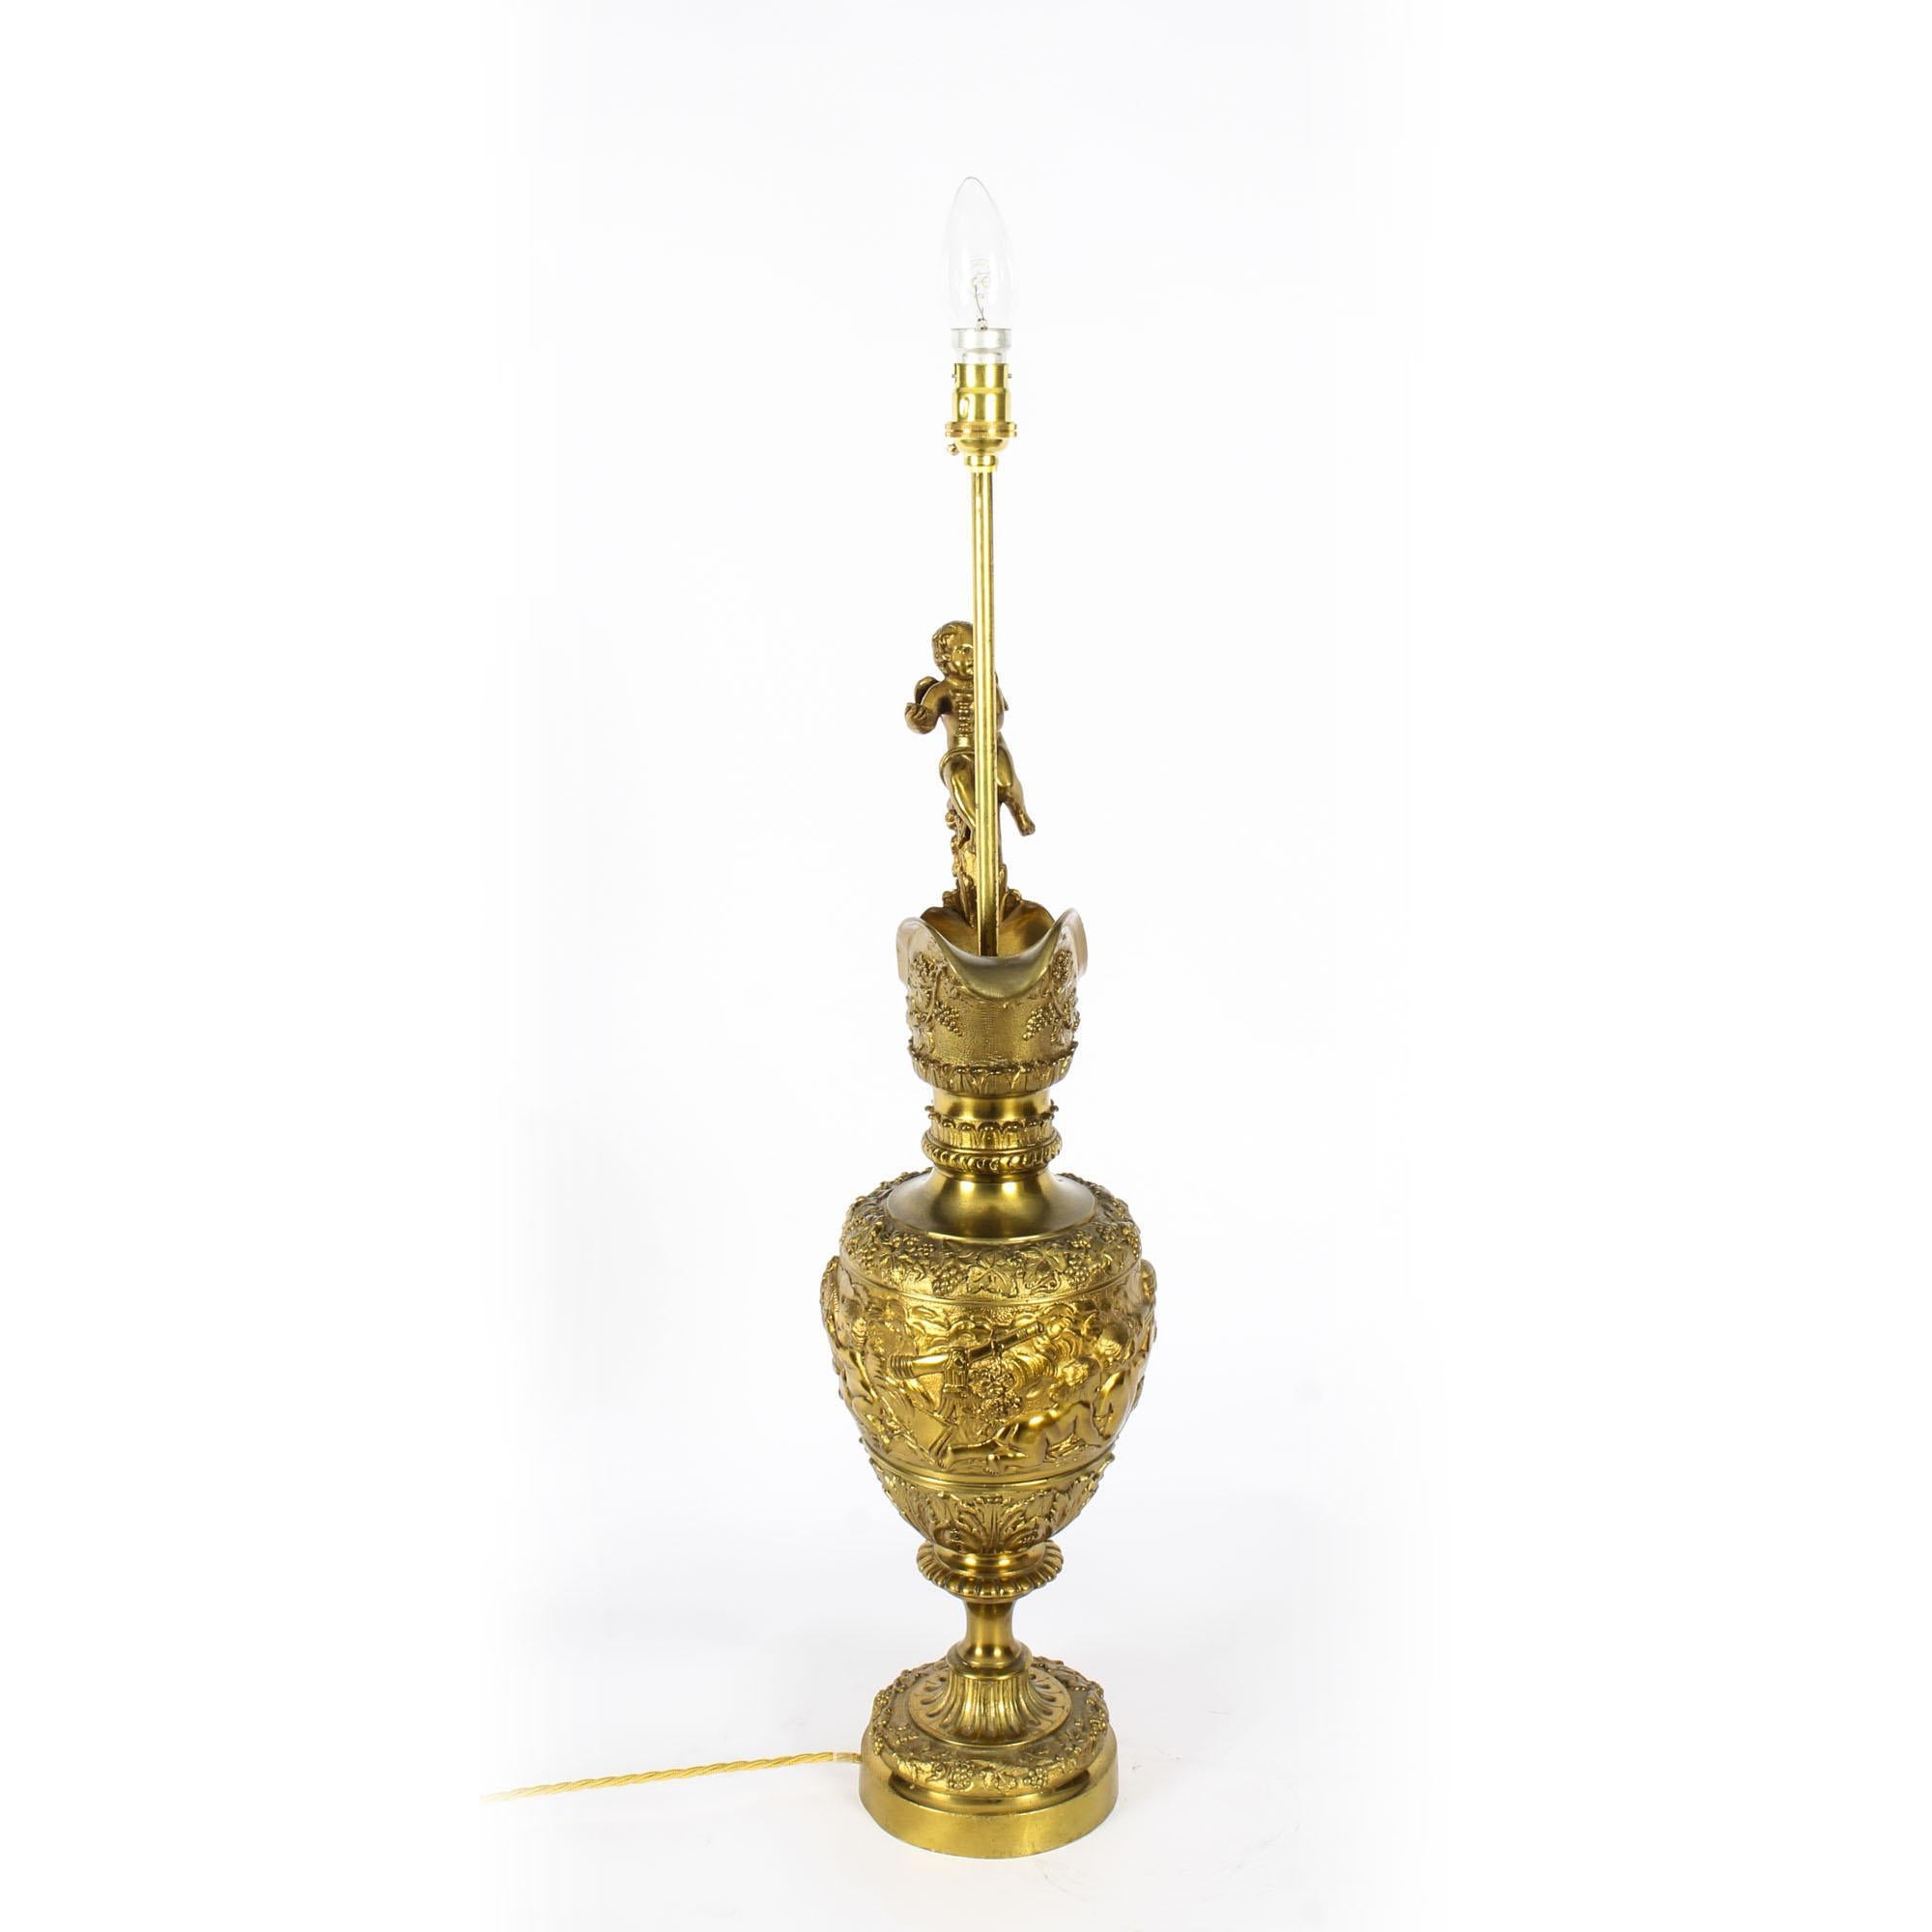 Antique Gilt Bronze Renaissance Revival Table Lamp, 19th Century In Good Condition For Sale In London, GB